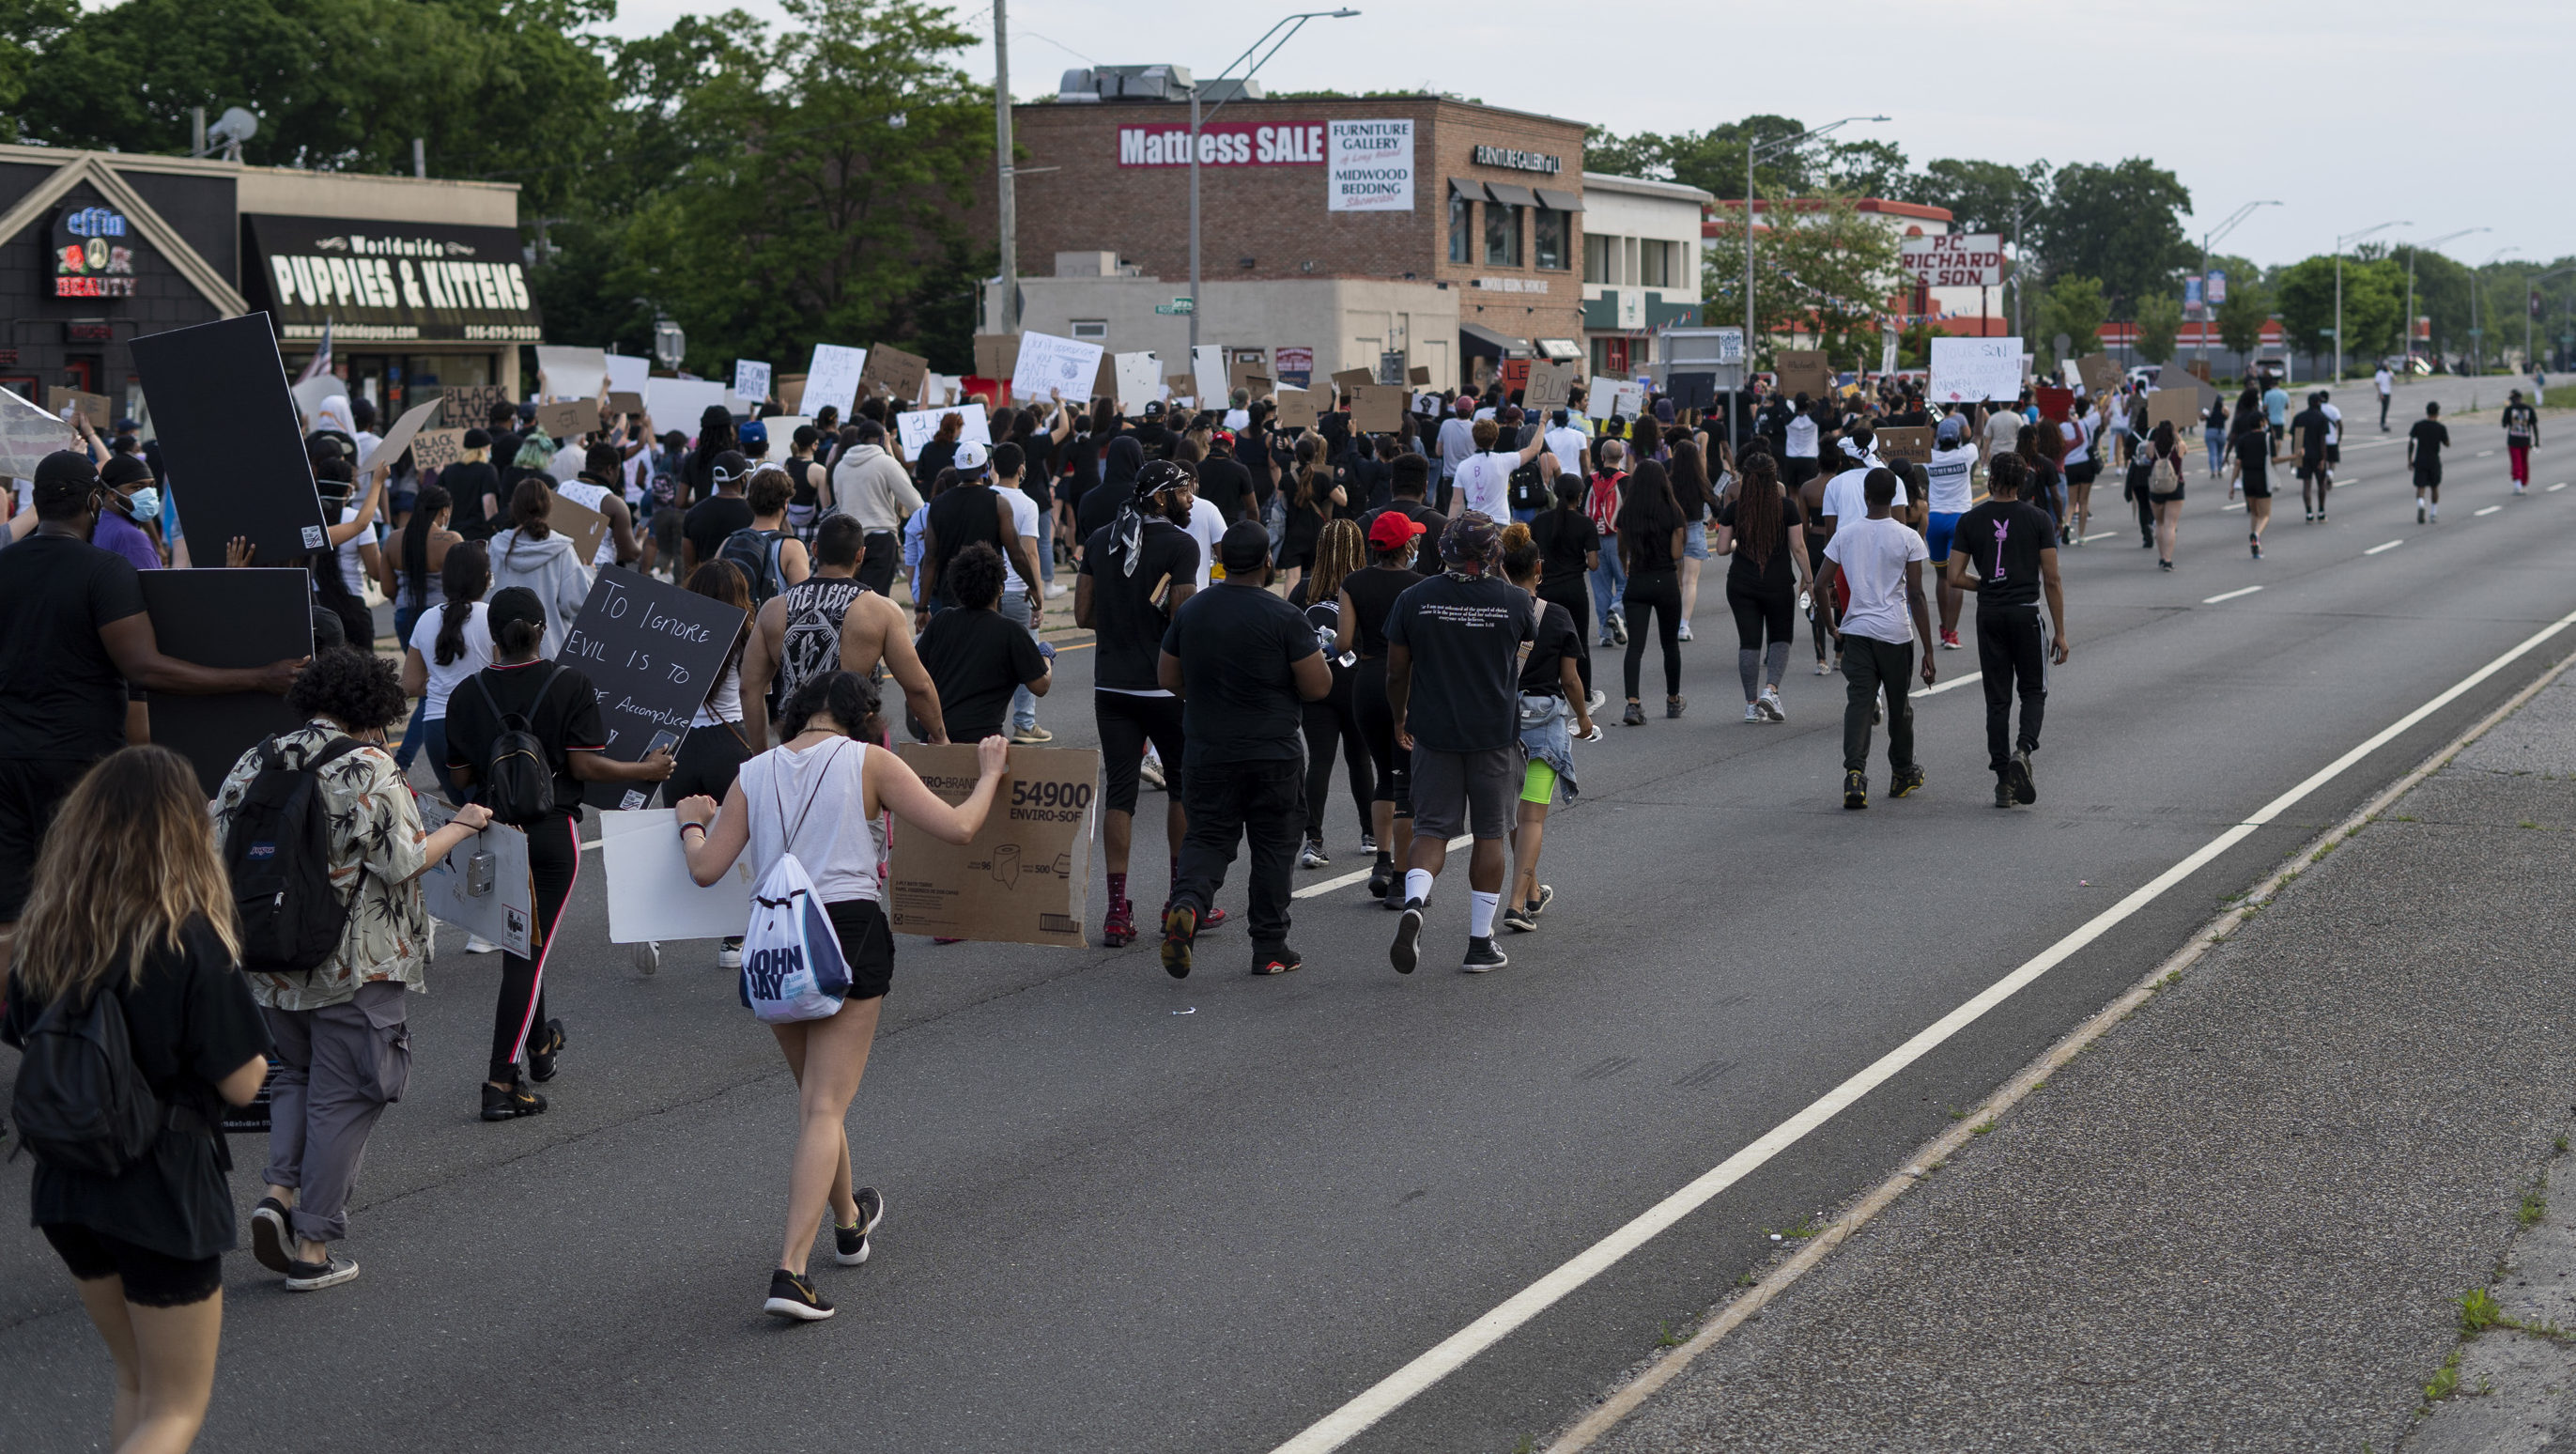 The Black Lives Matter and George Floyd memorial march closed down part of Sunrise Highway